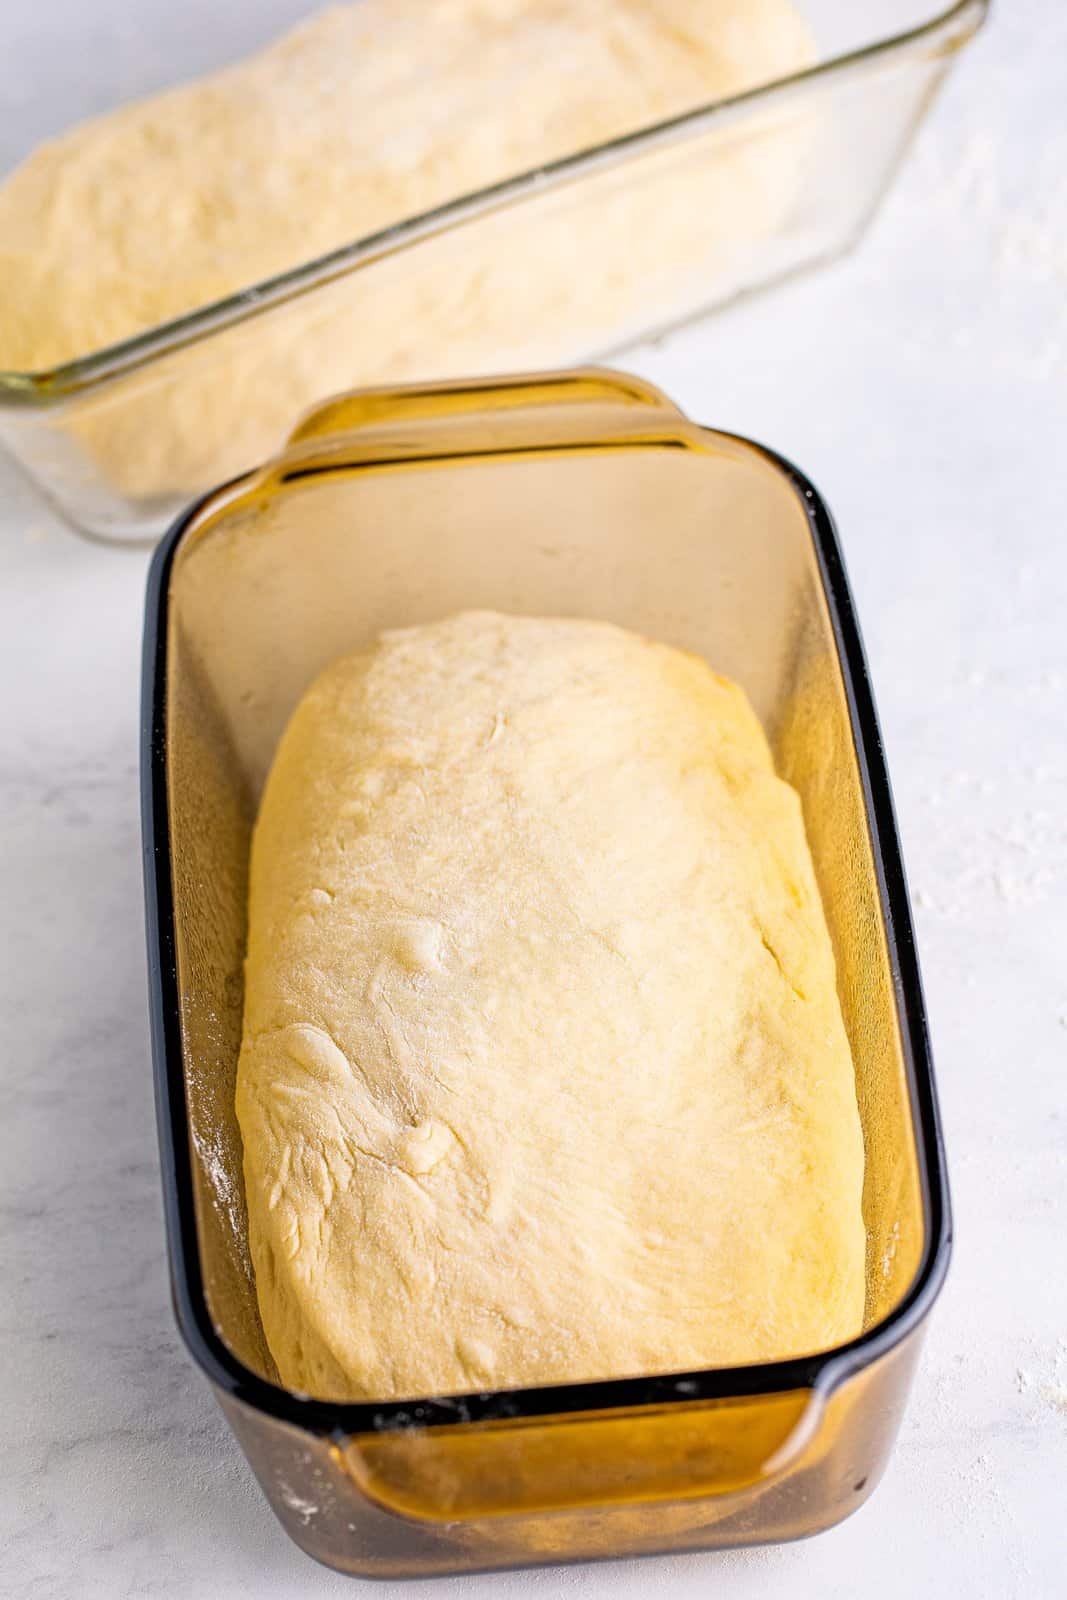 Dough placed in loaf pans.